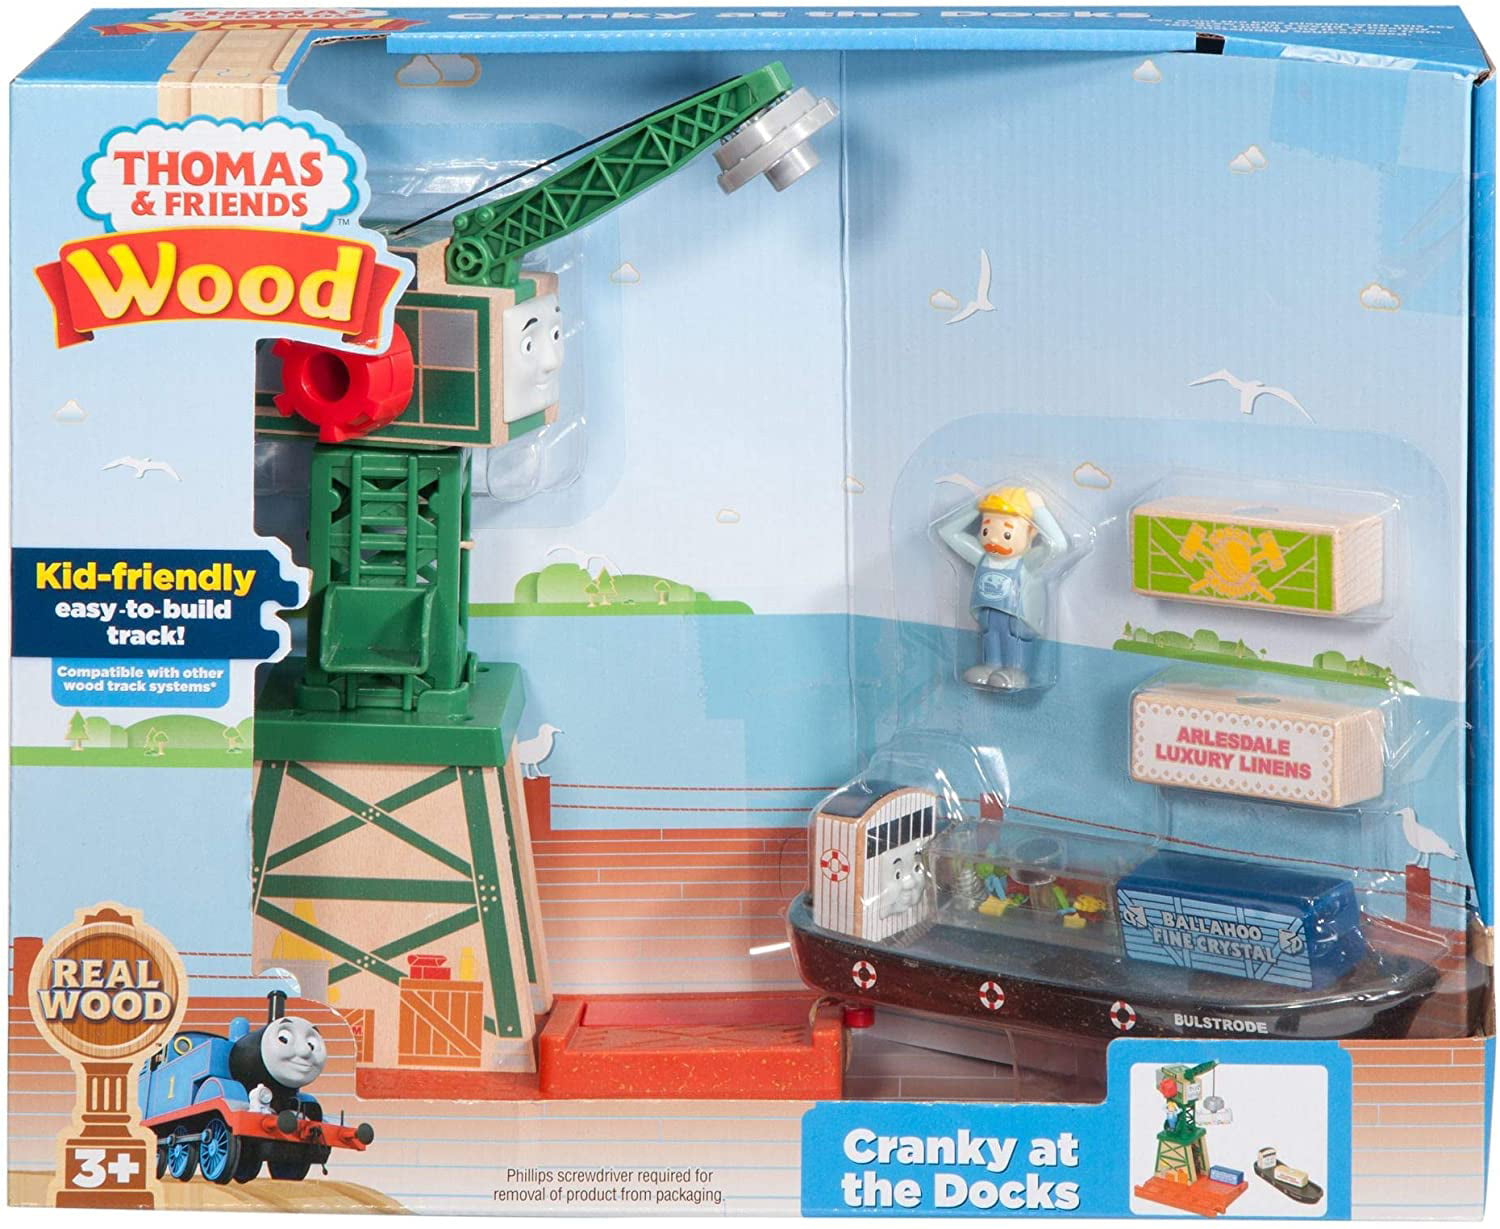 Cranky at The Docks Fisher-Price Thomas & Friends Wood